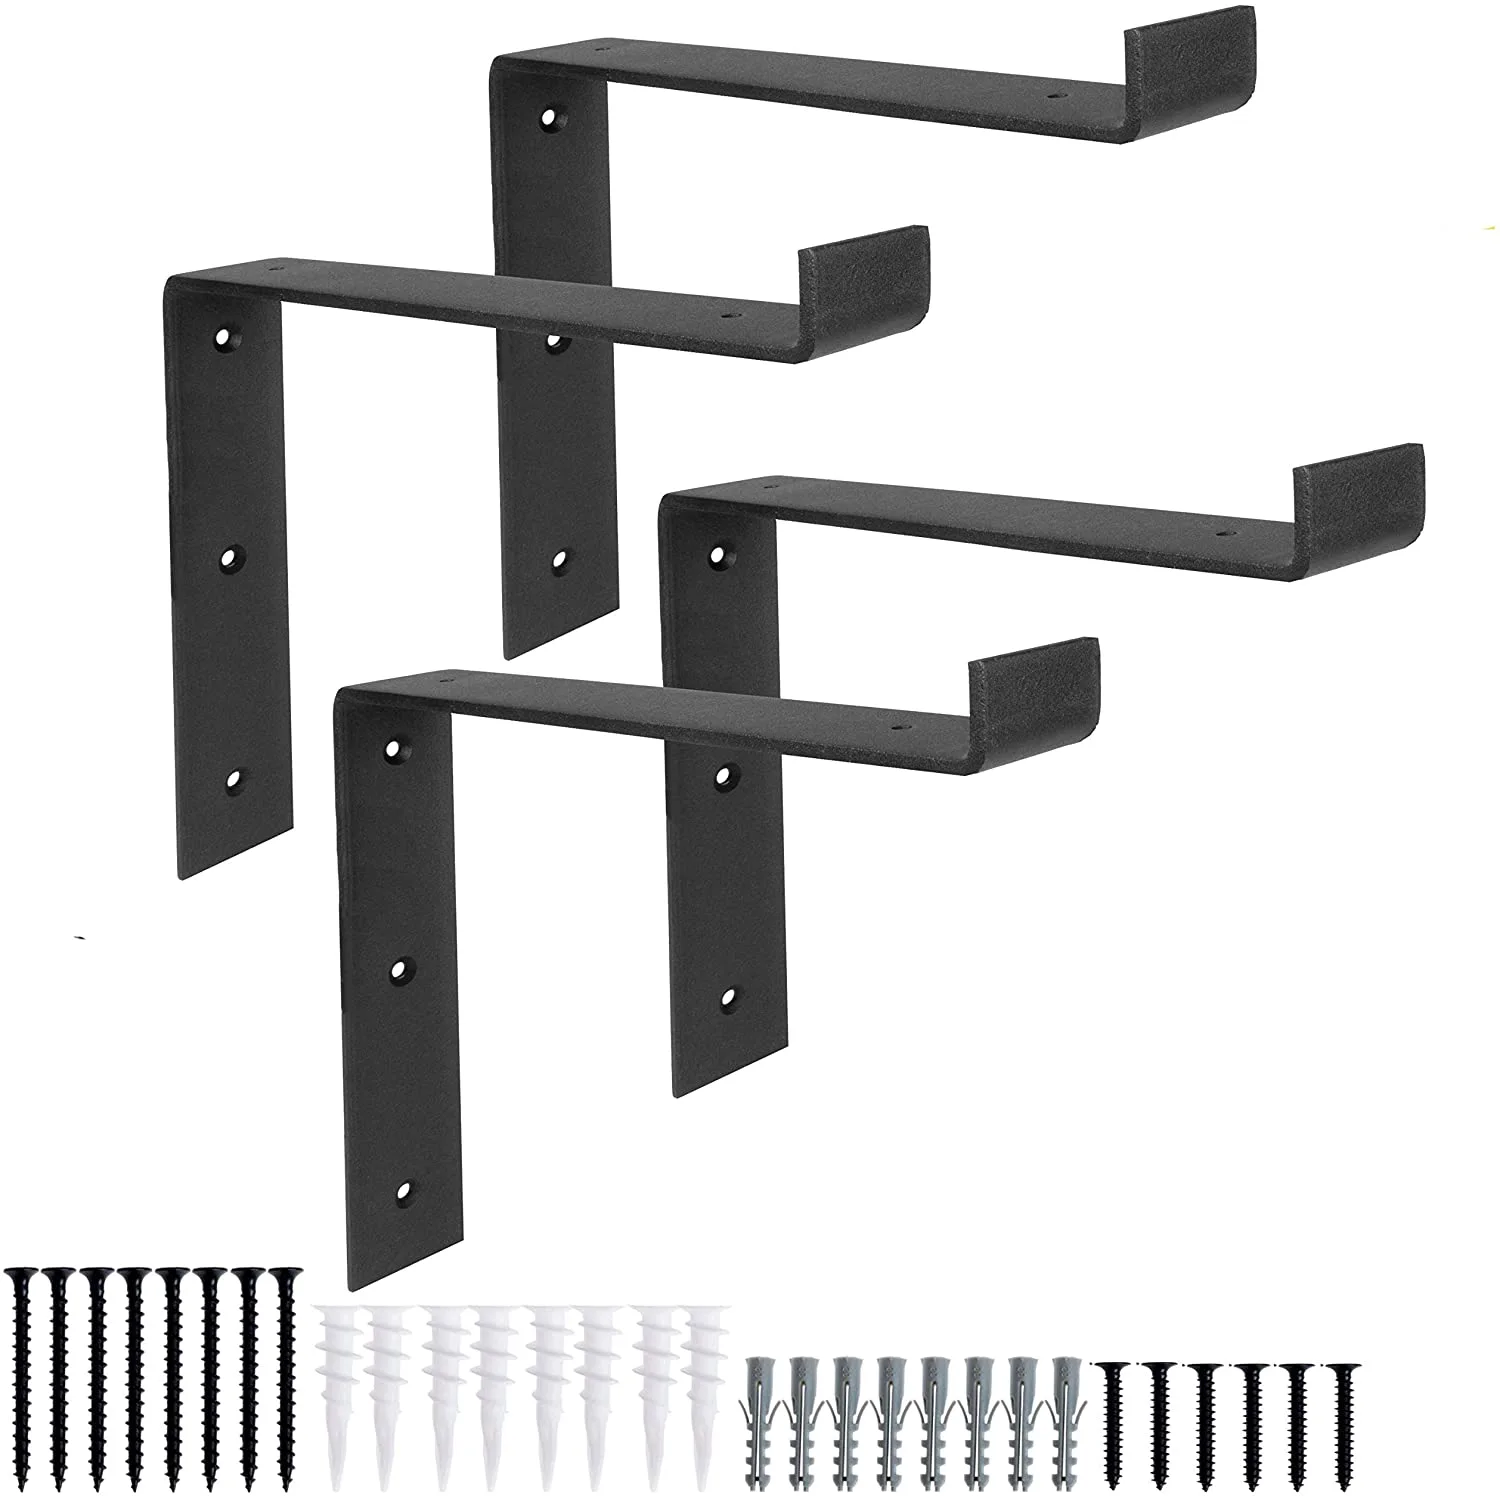 Heavy Duty Floating Wall Shelf Invisible Brackets - Buy invisible shelf brackets, invisible brackets for floating shelves, floating shelf invisible brackets Product on Surealong